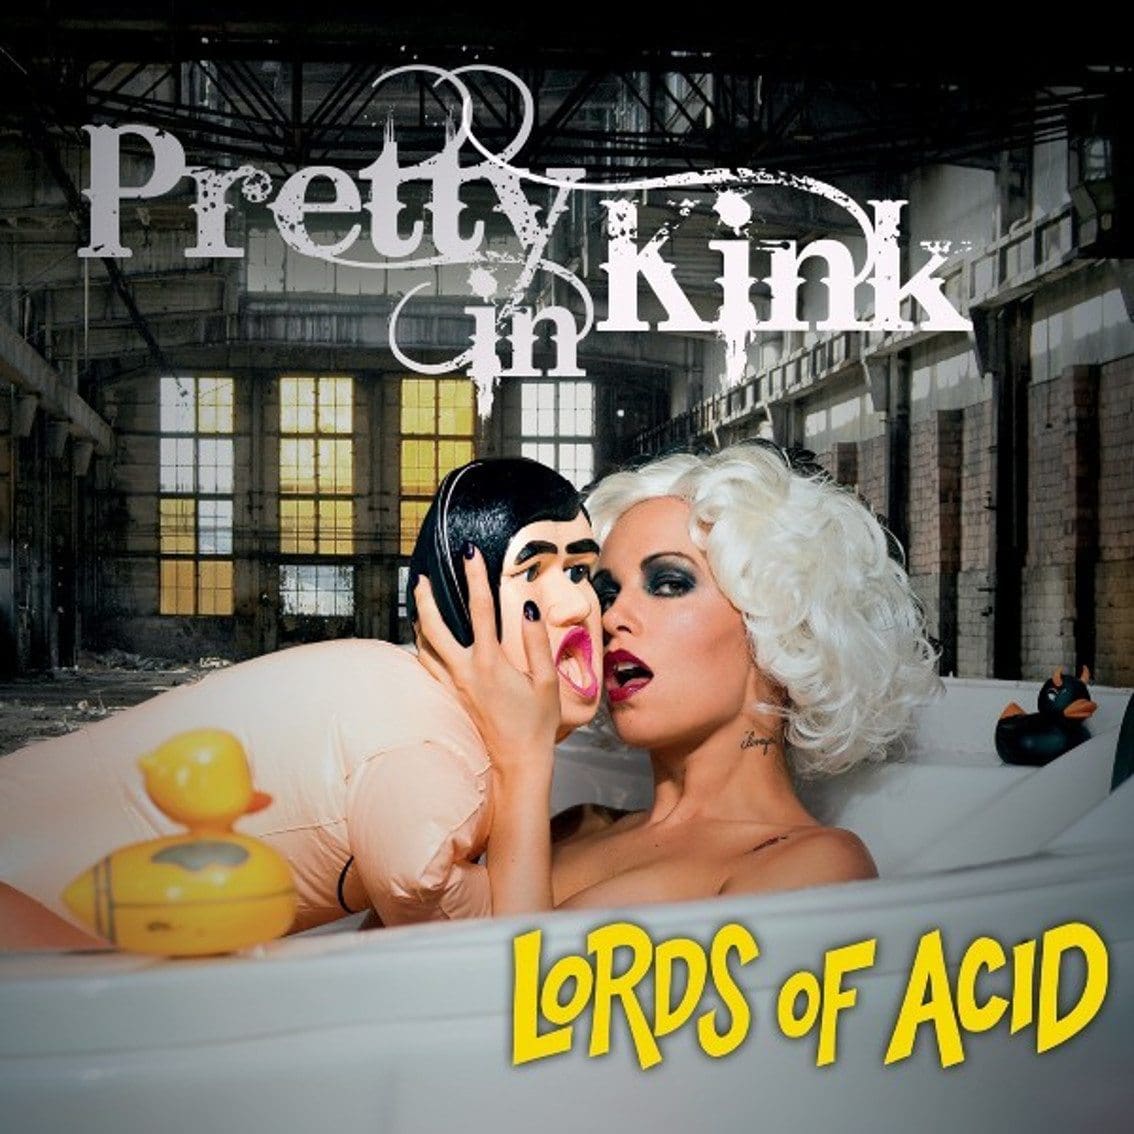 Lors Of Acid return with 'Pretty in kink' album (also on vinyl)